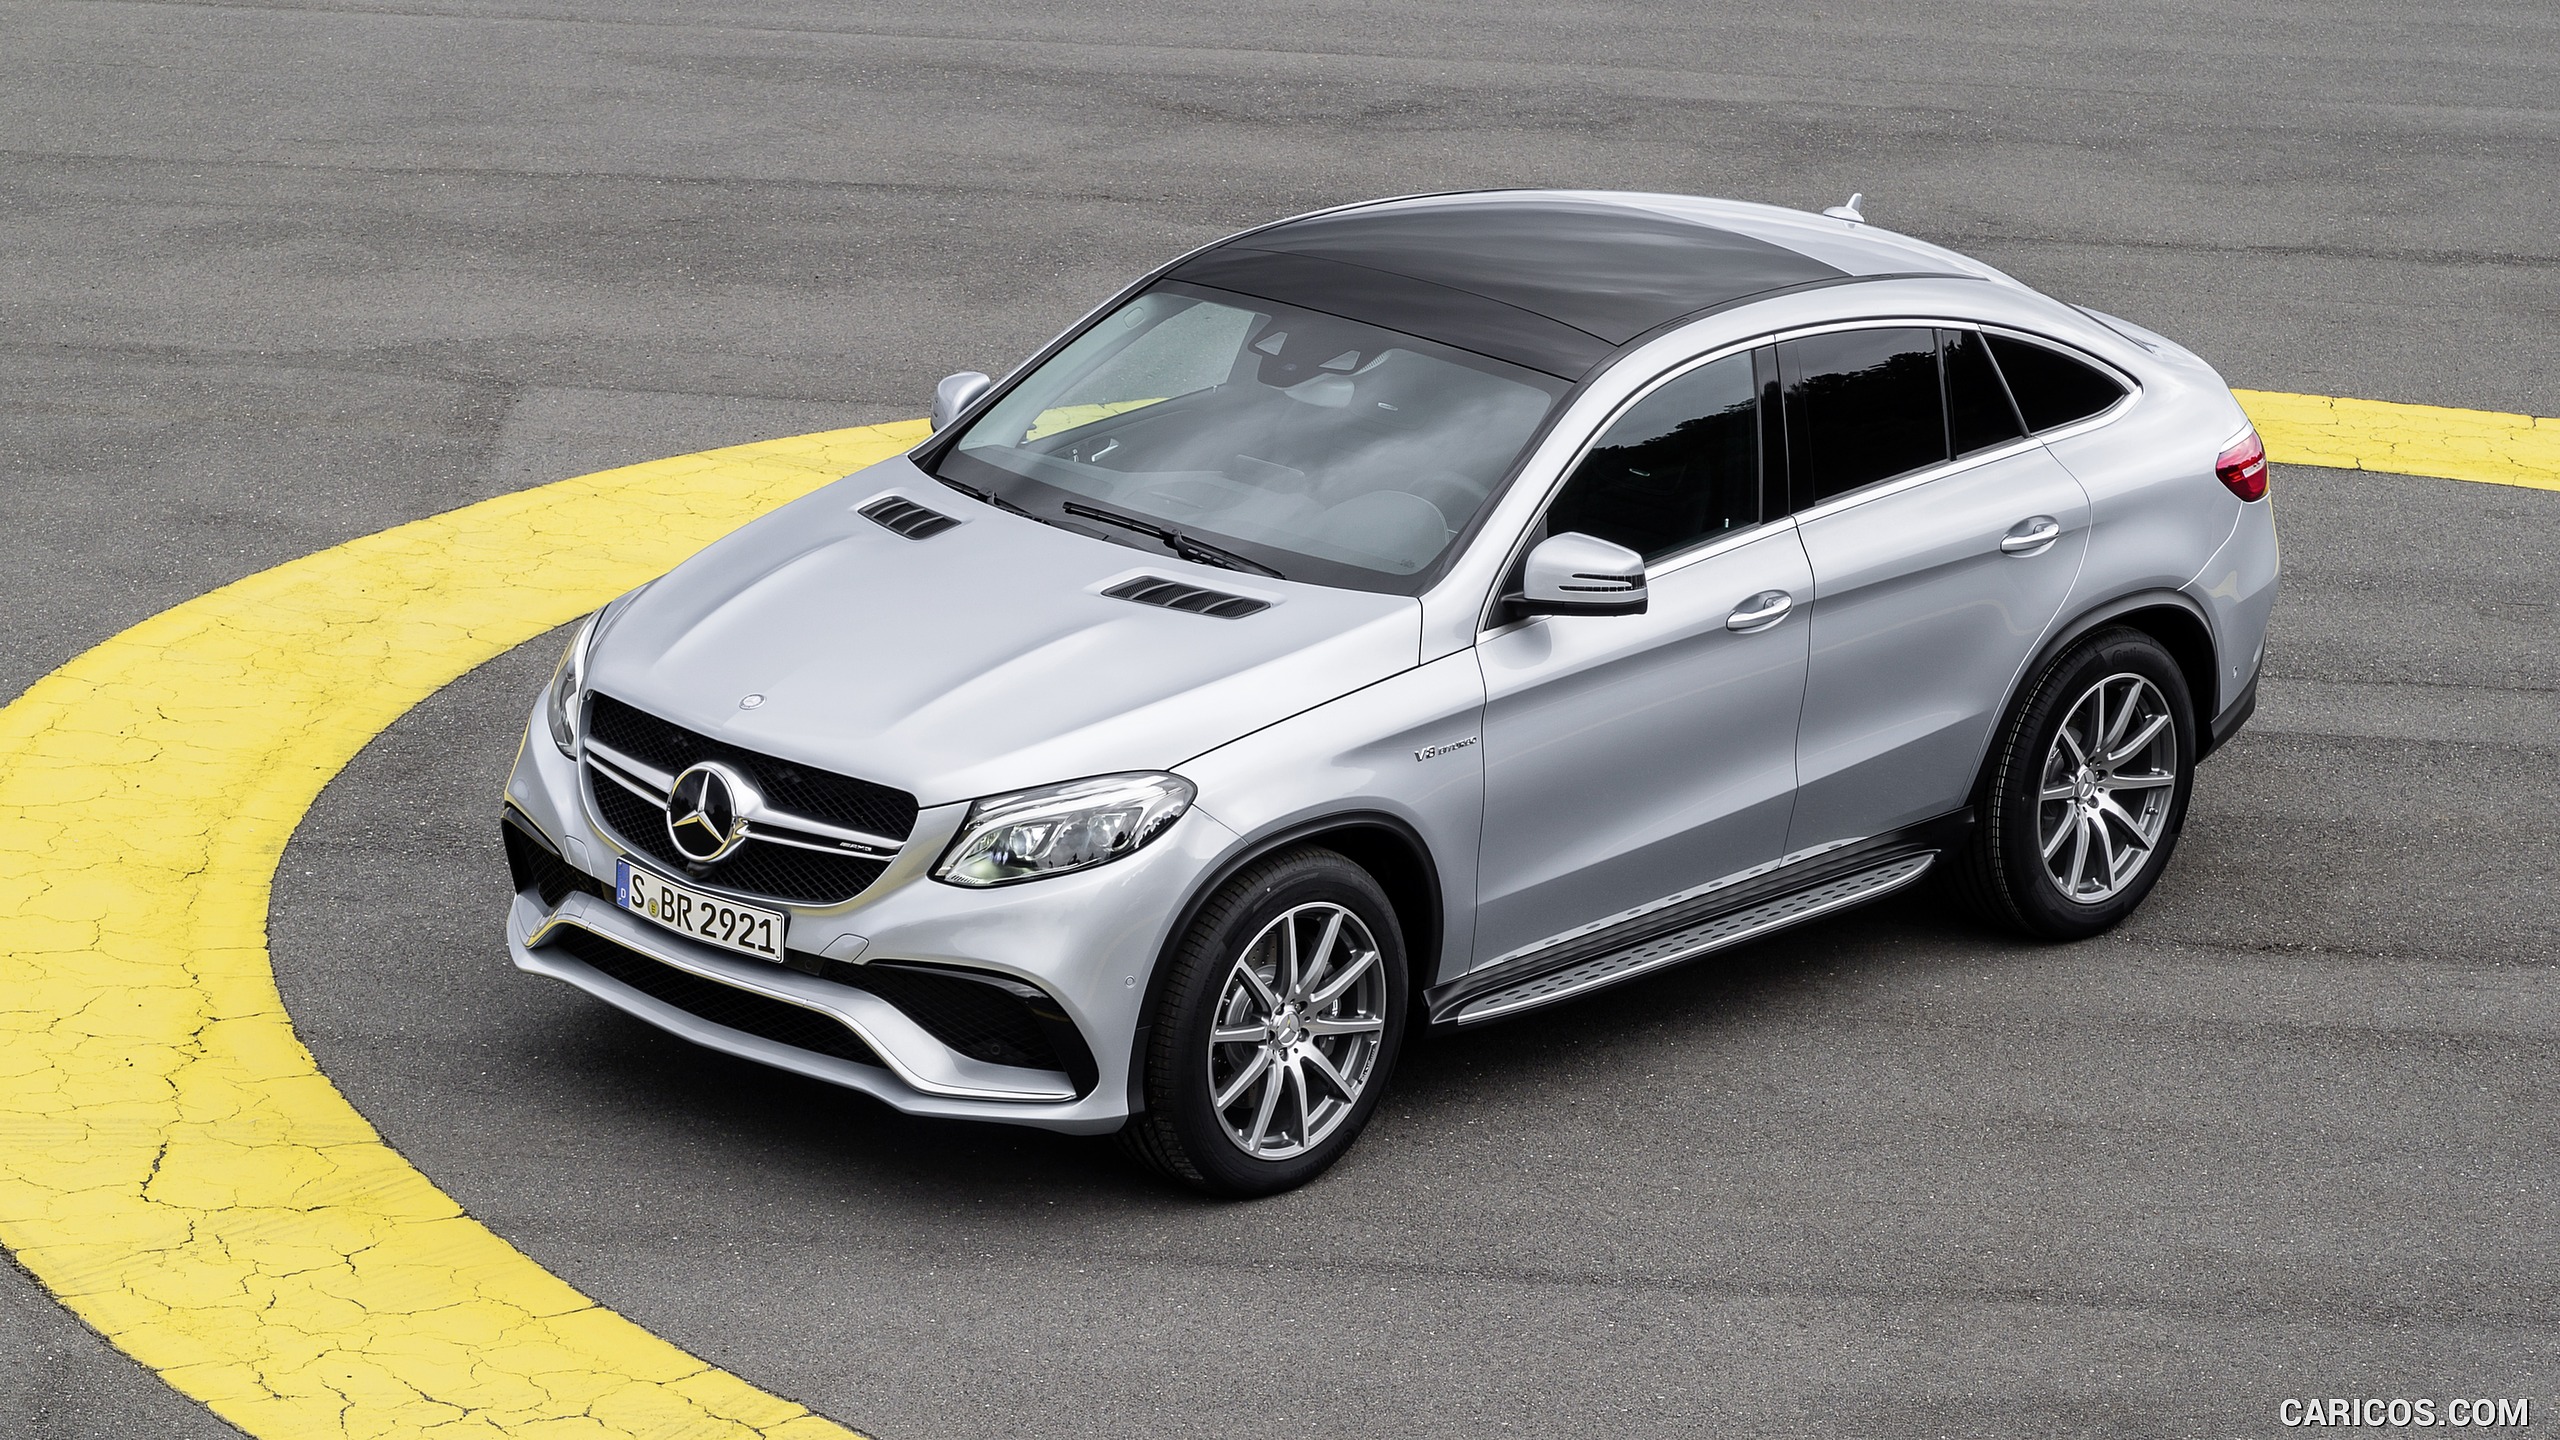 2016 Mercedes-AMG GLE 63 Coupe 4MATIC - Front, #36 of 65